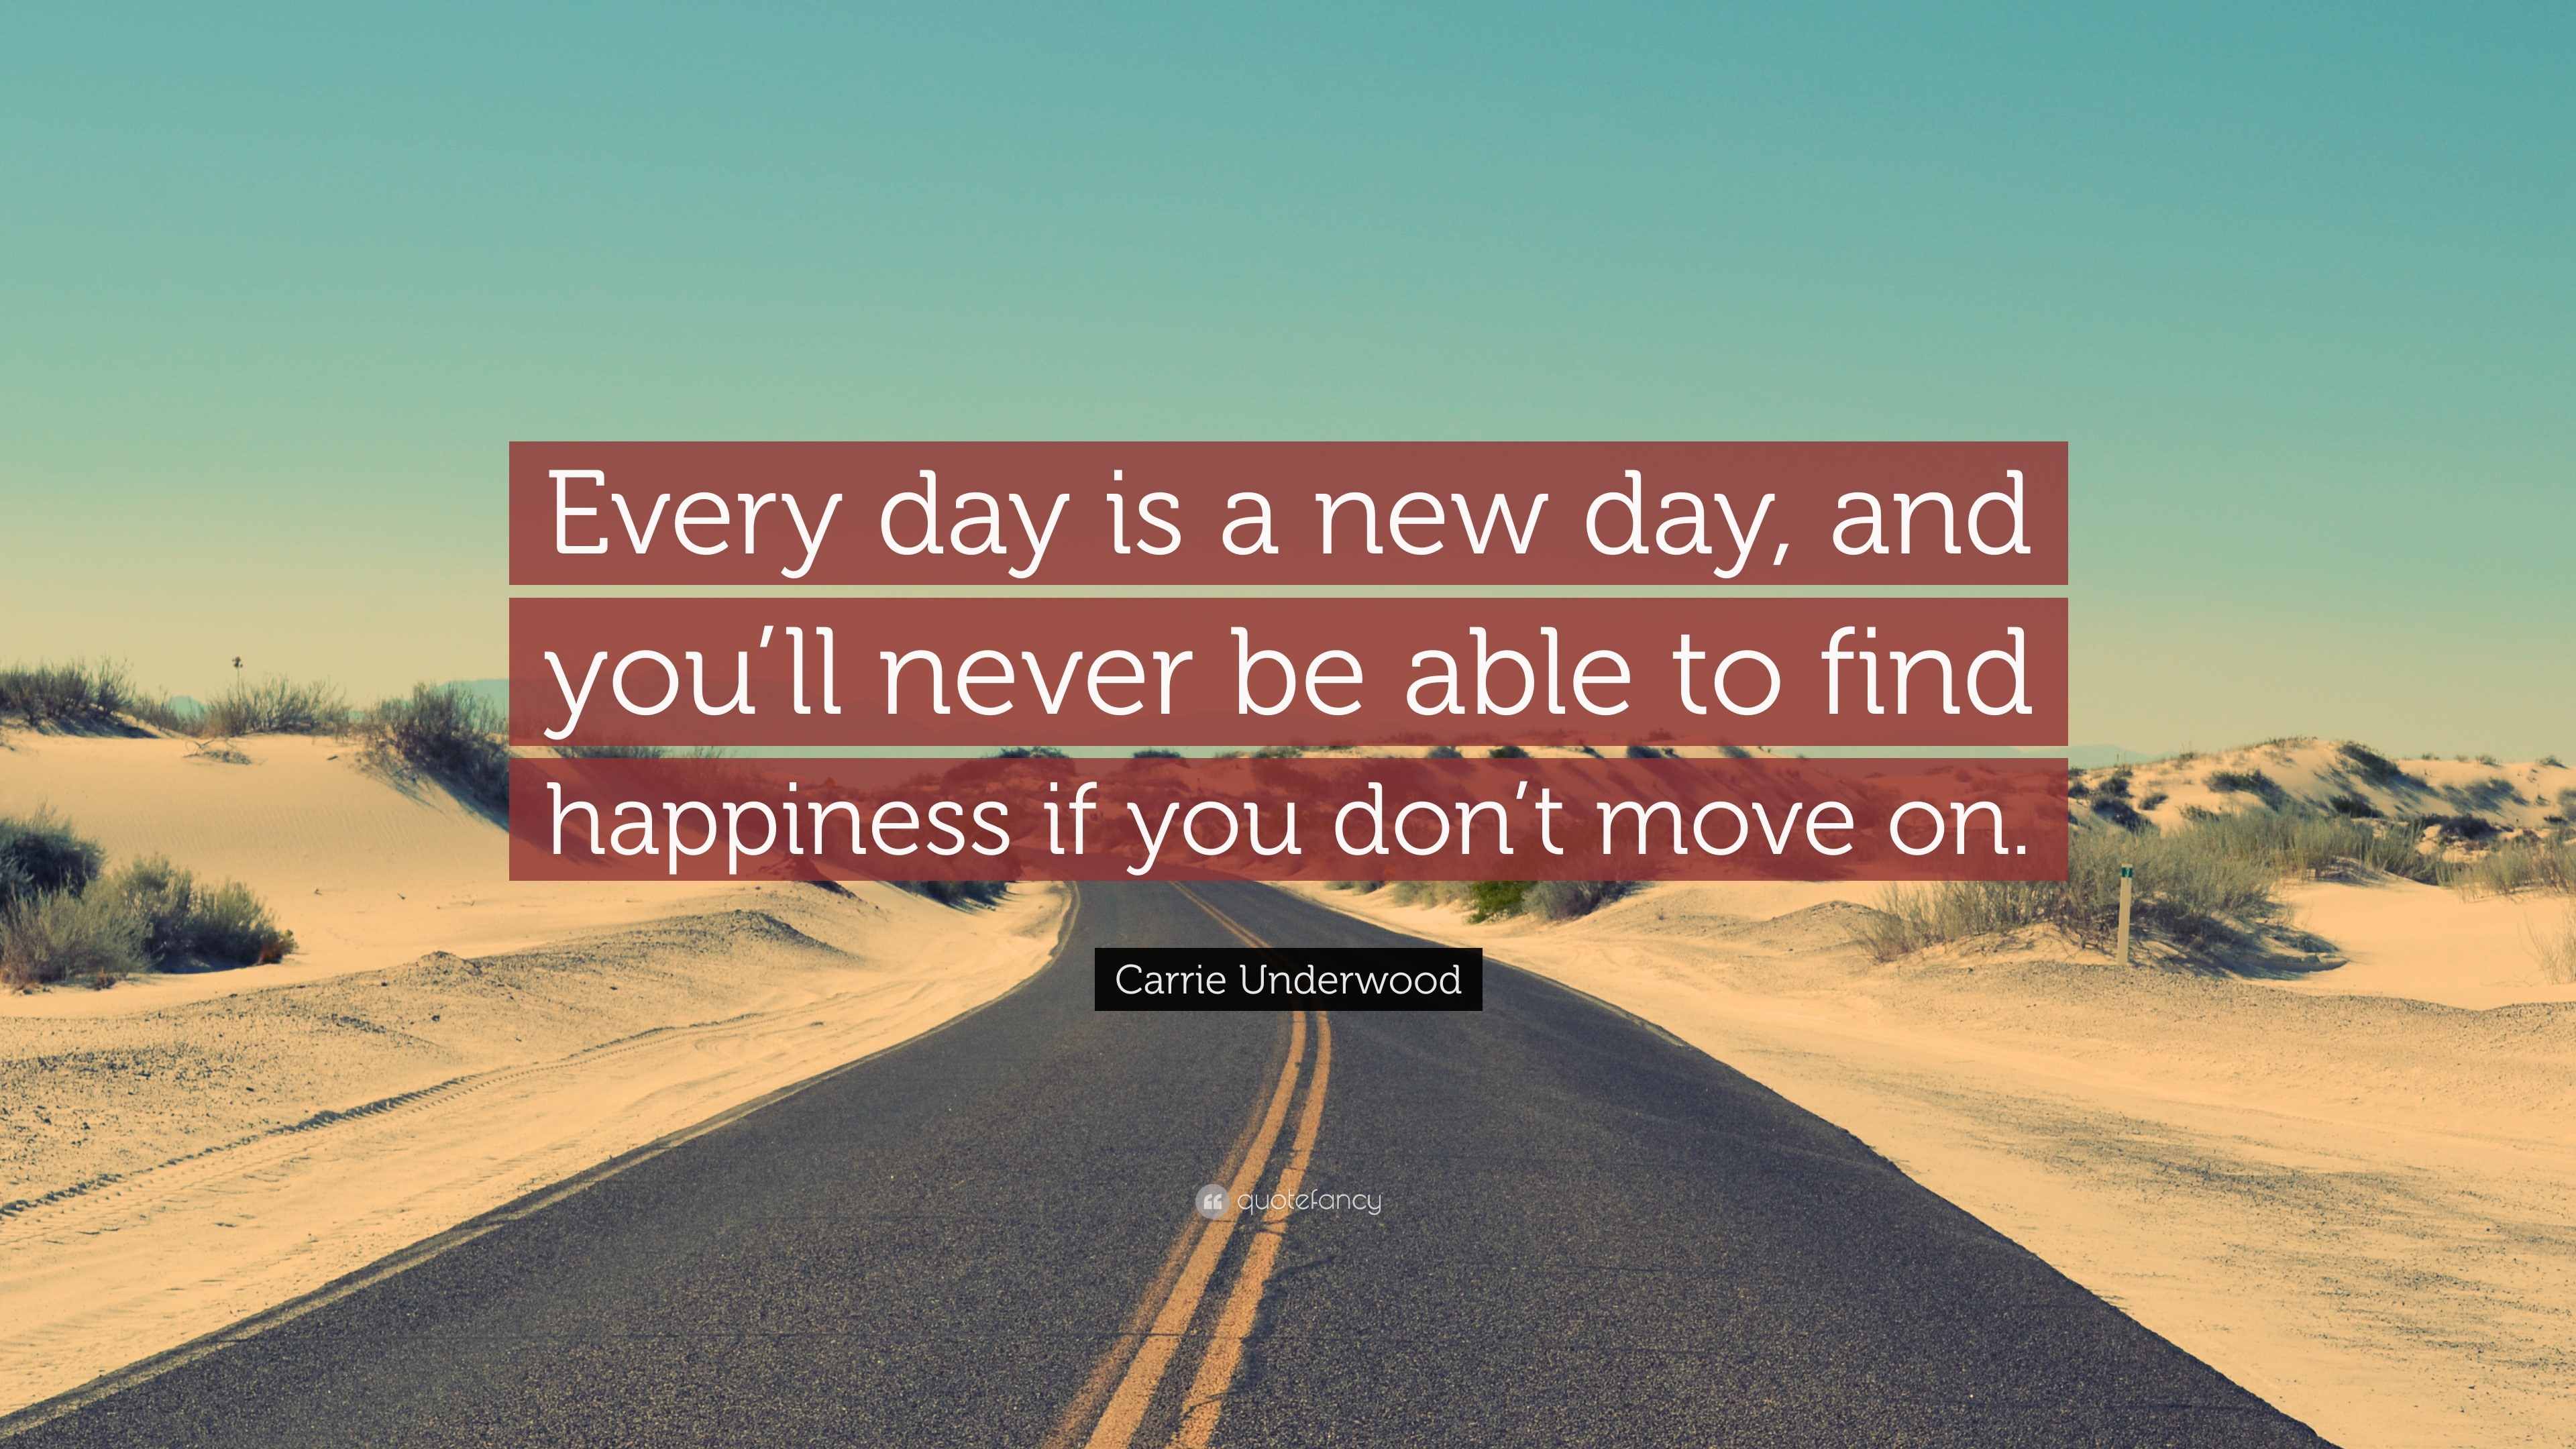 Carrie Underwood Quote Every Day Is A New Day And You Ll Never Be Able To Find Happiness If You Don T Move On 7 Wallpapers Quotefancy